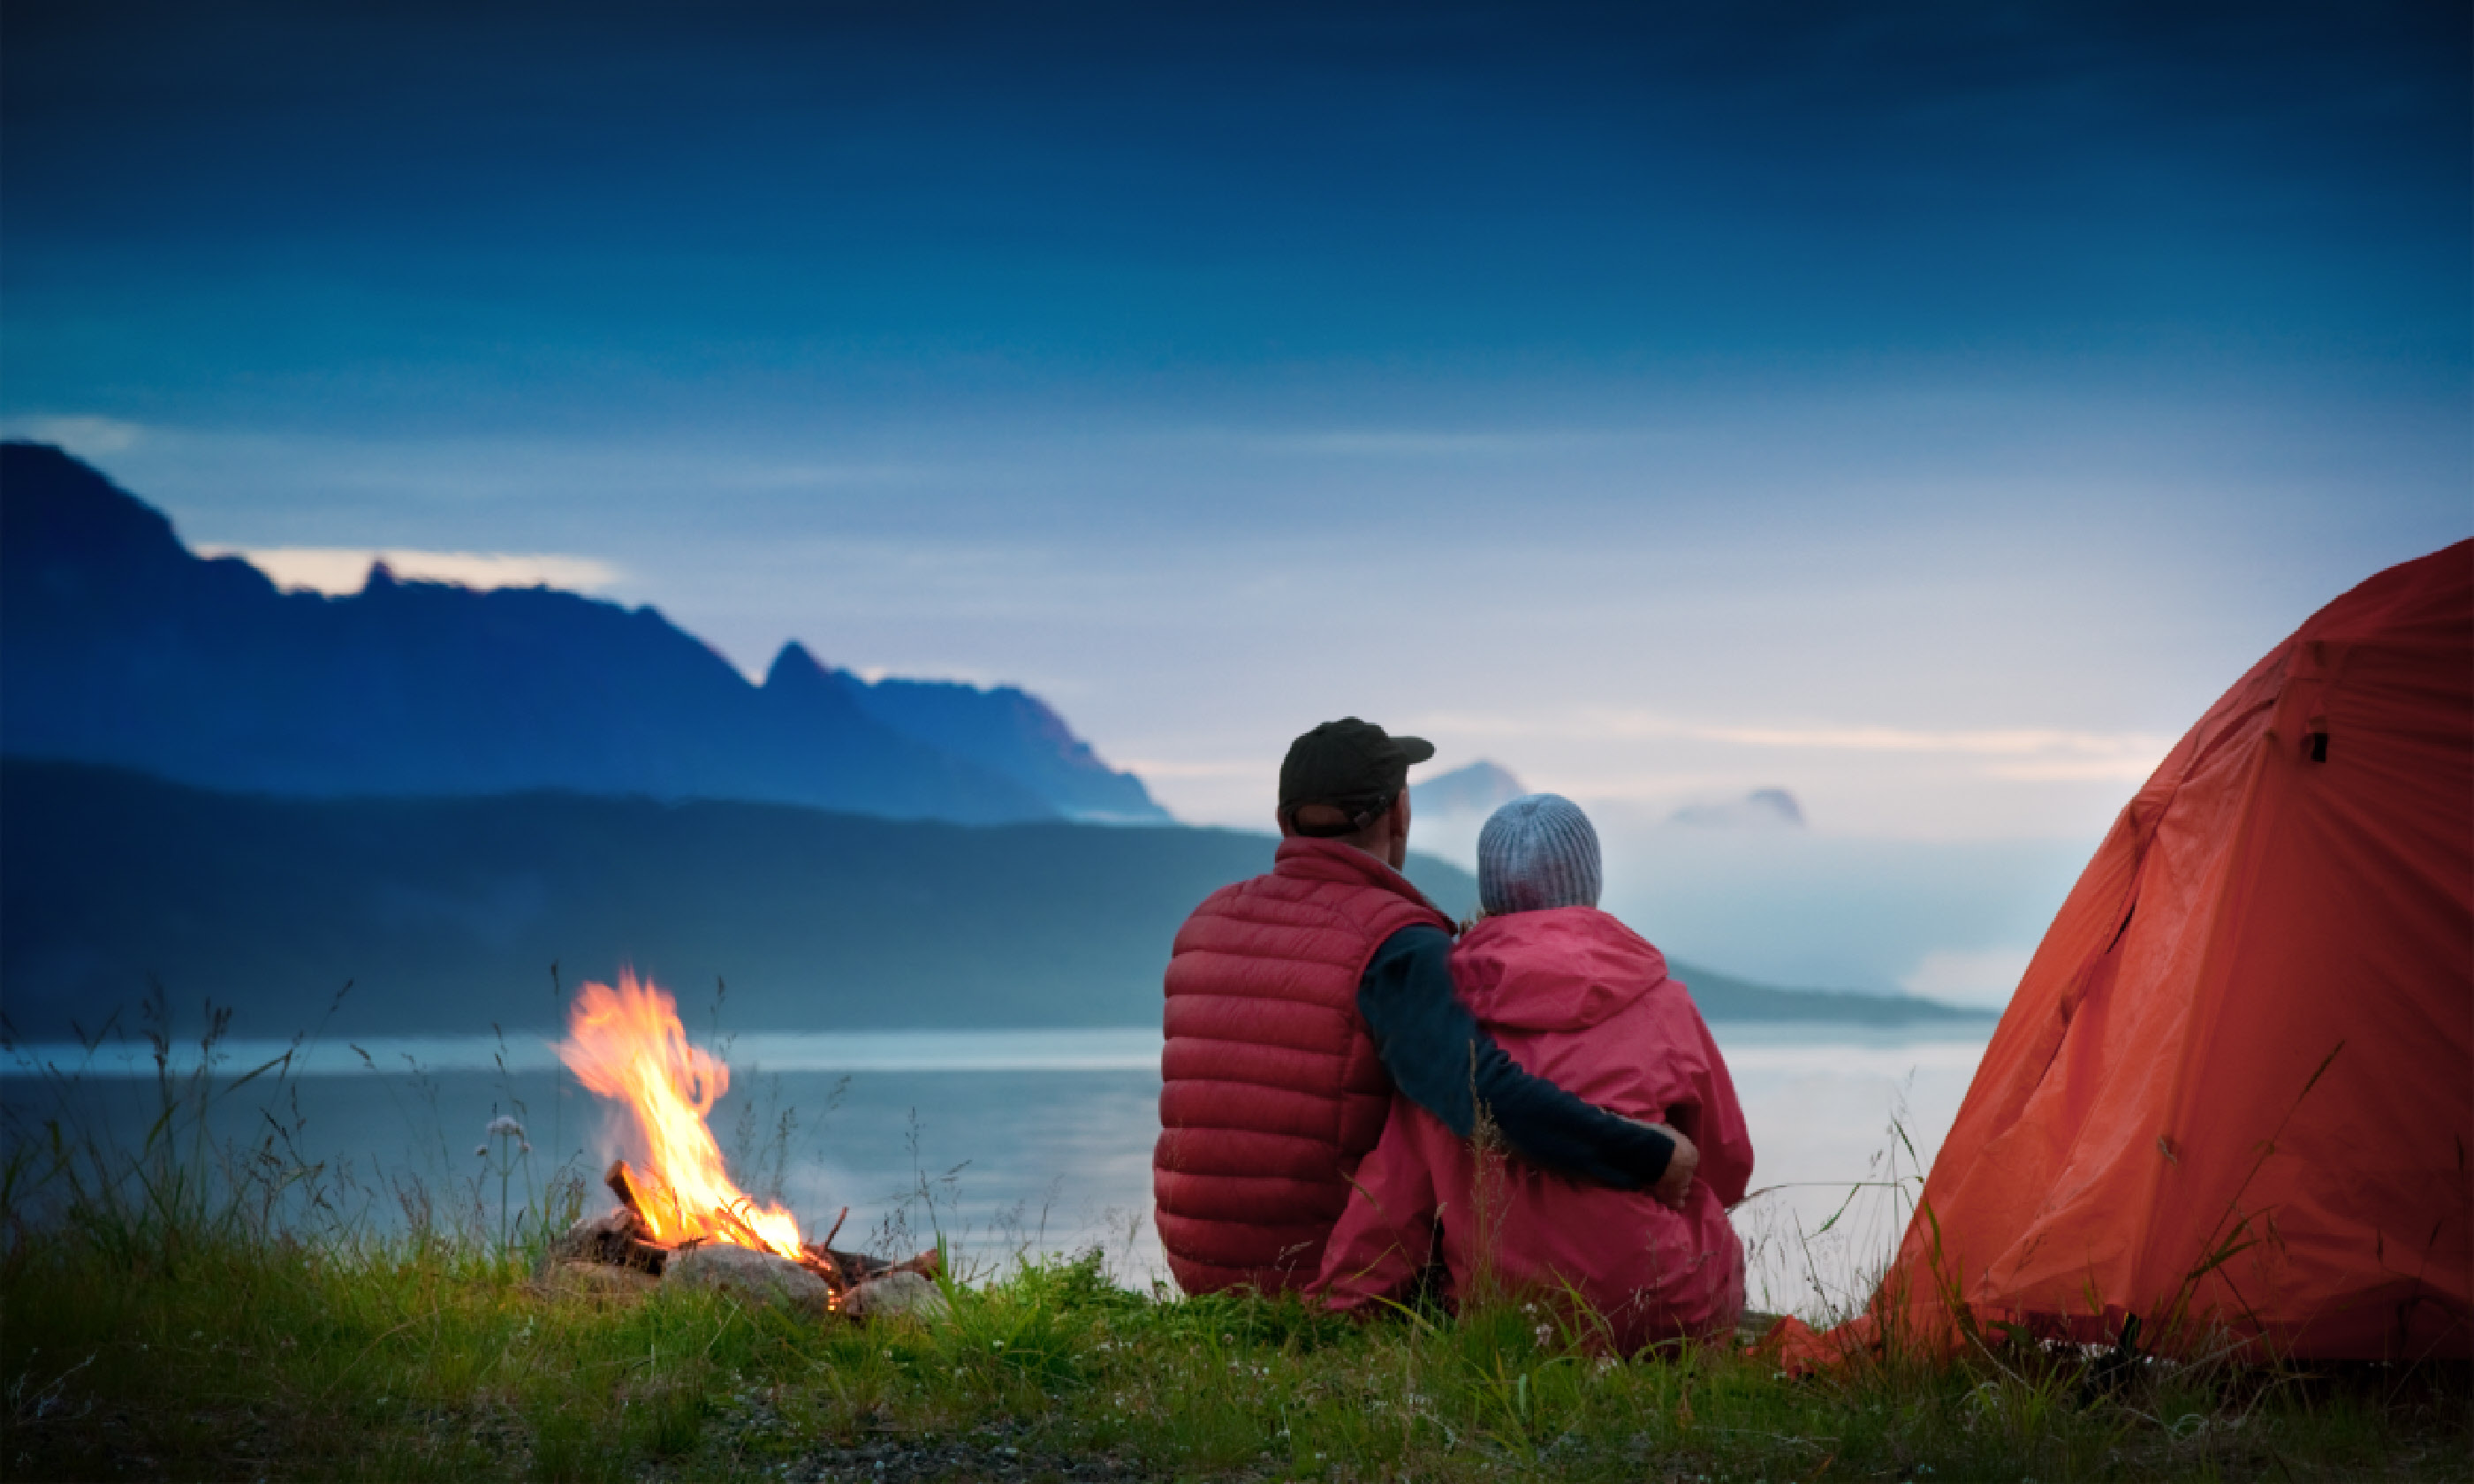 Couple with tent near seaside (Shutterstock: see credit below)